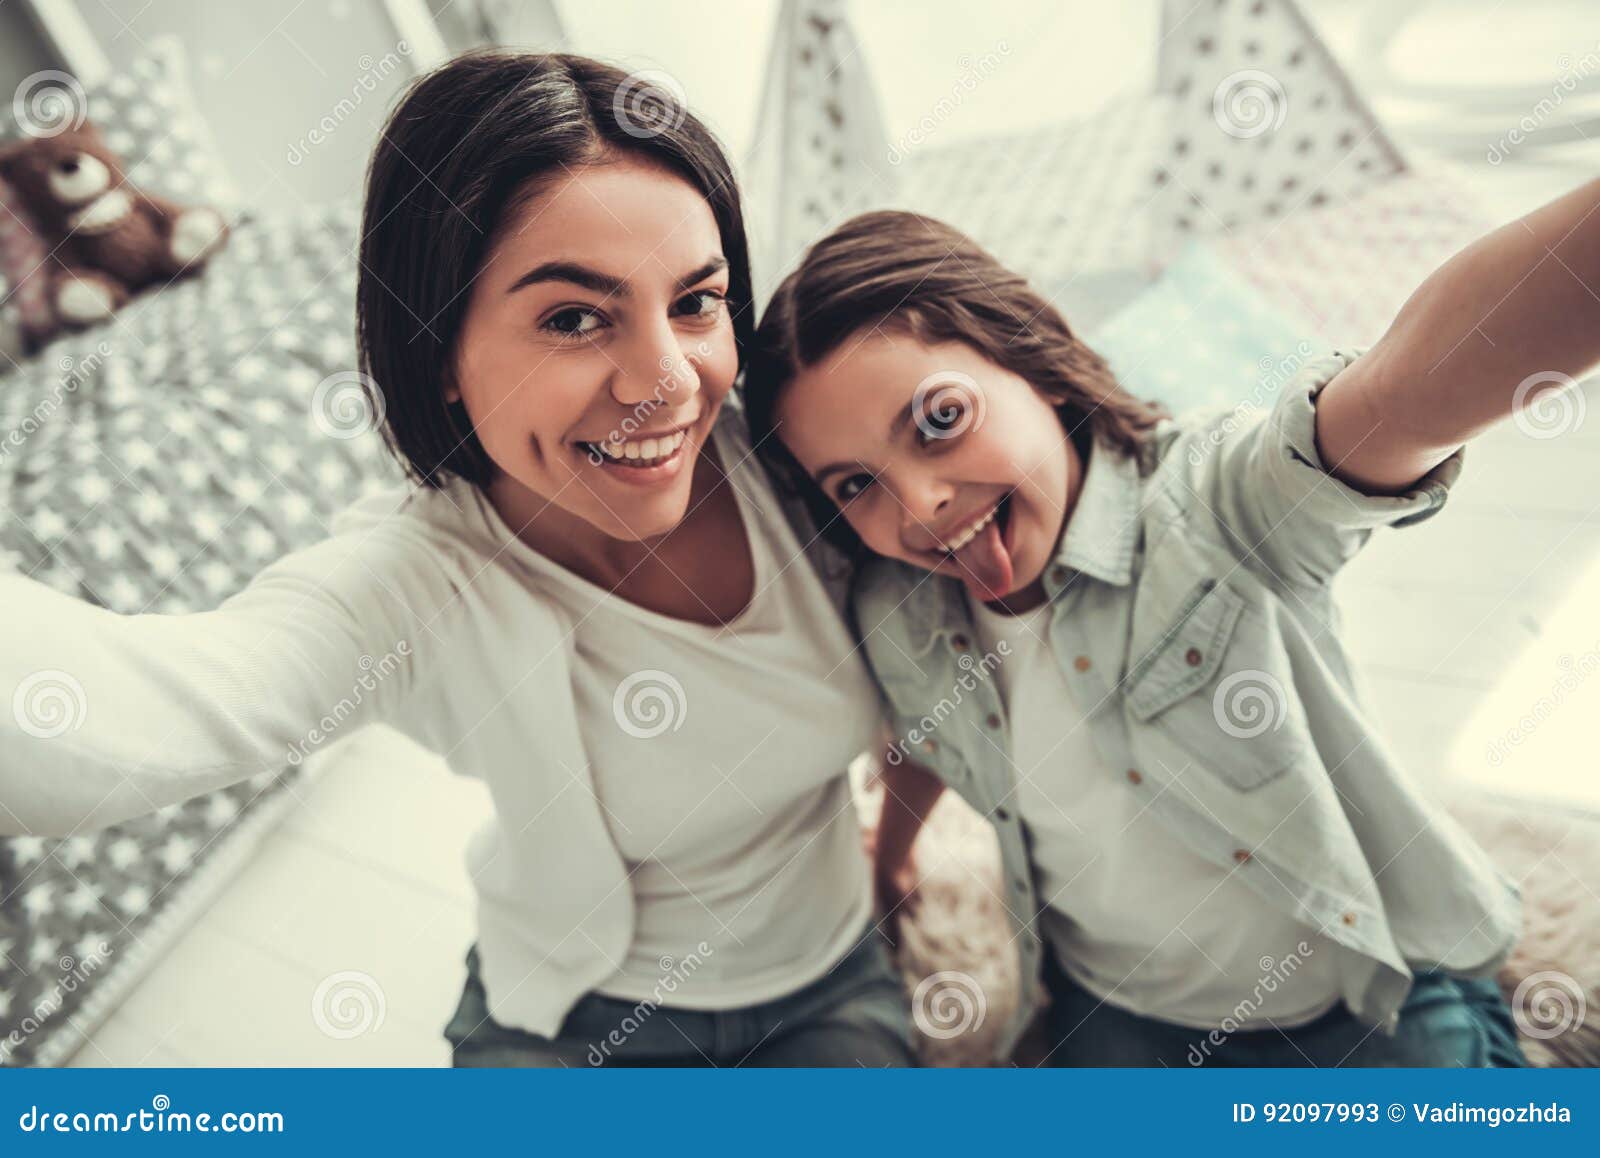 Mom and daughter stock image. Image of couple, little - 92097993